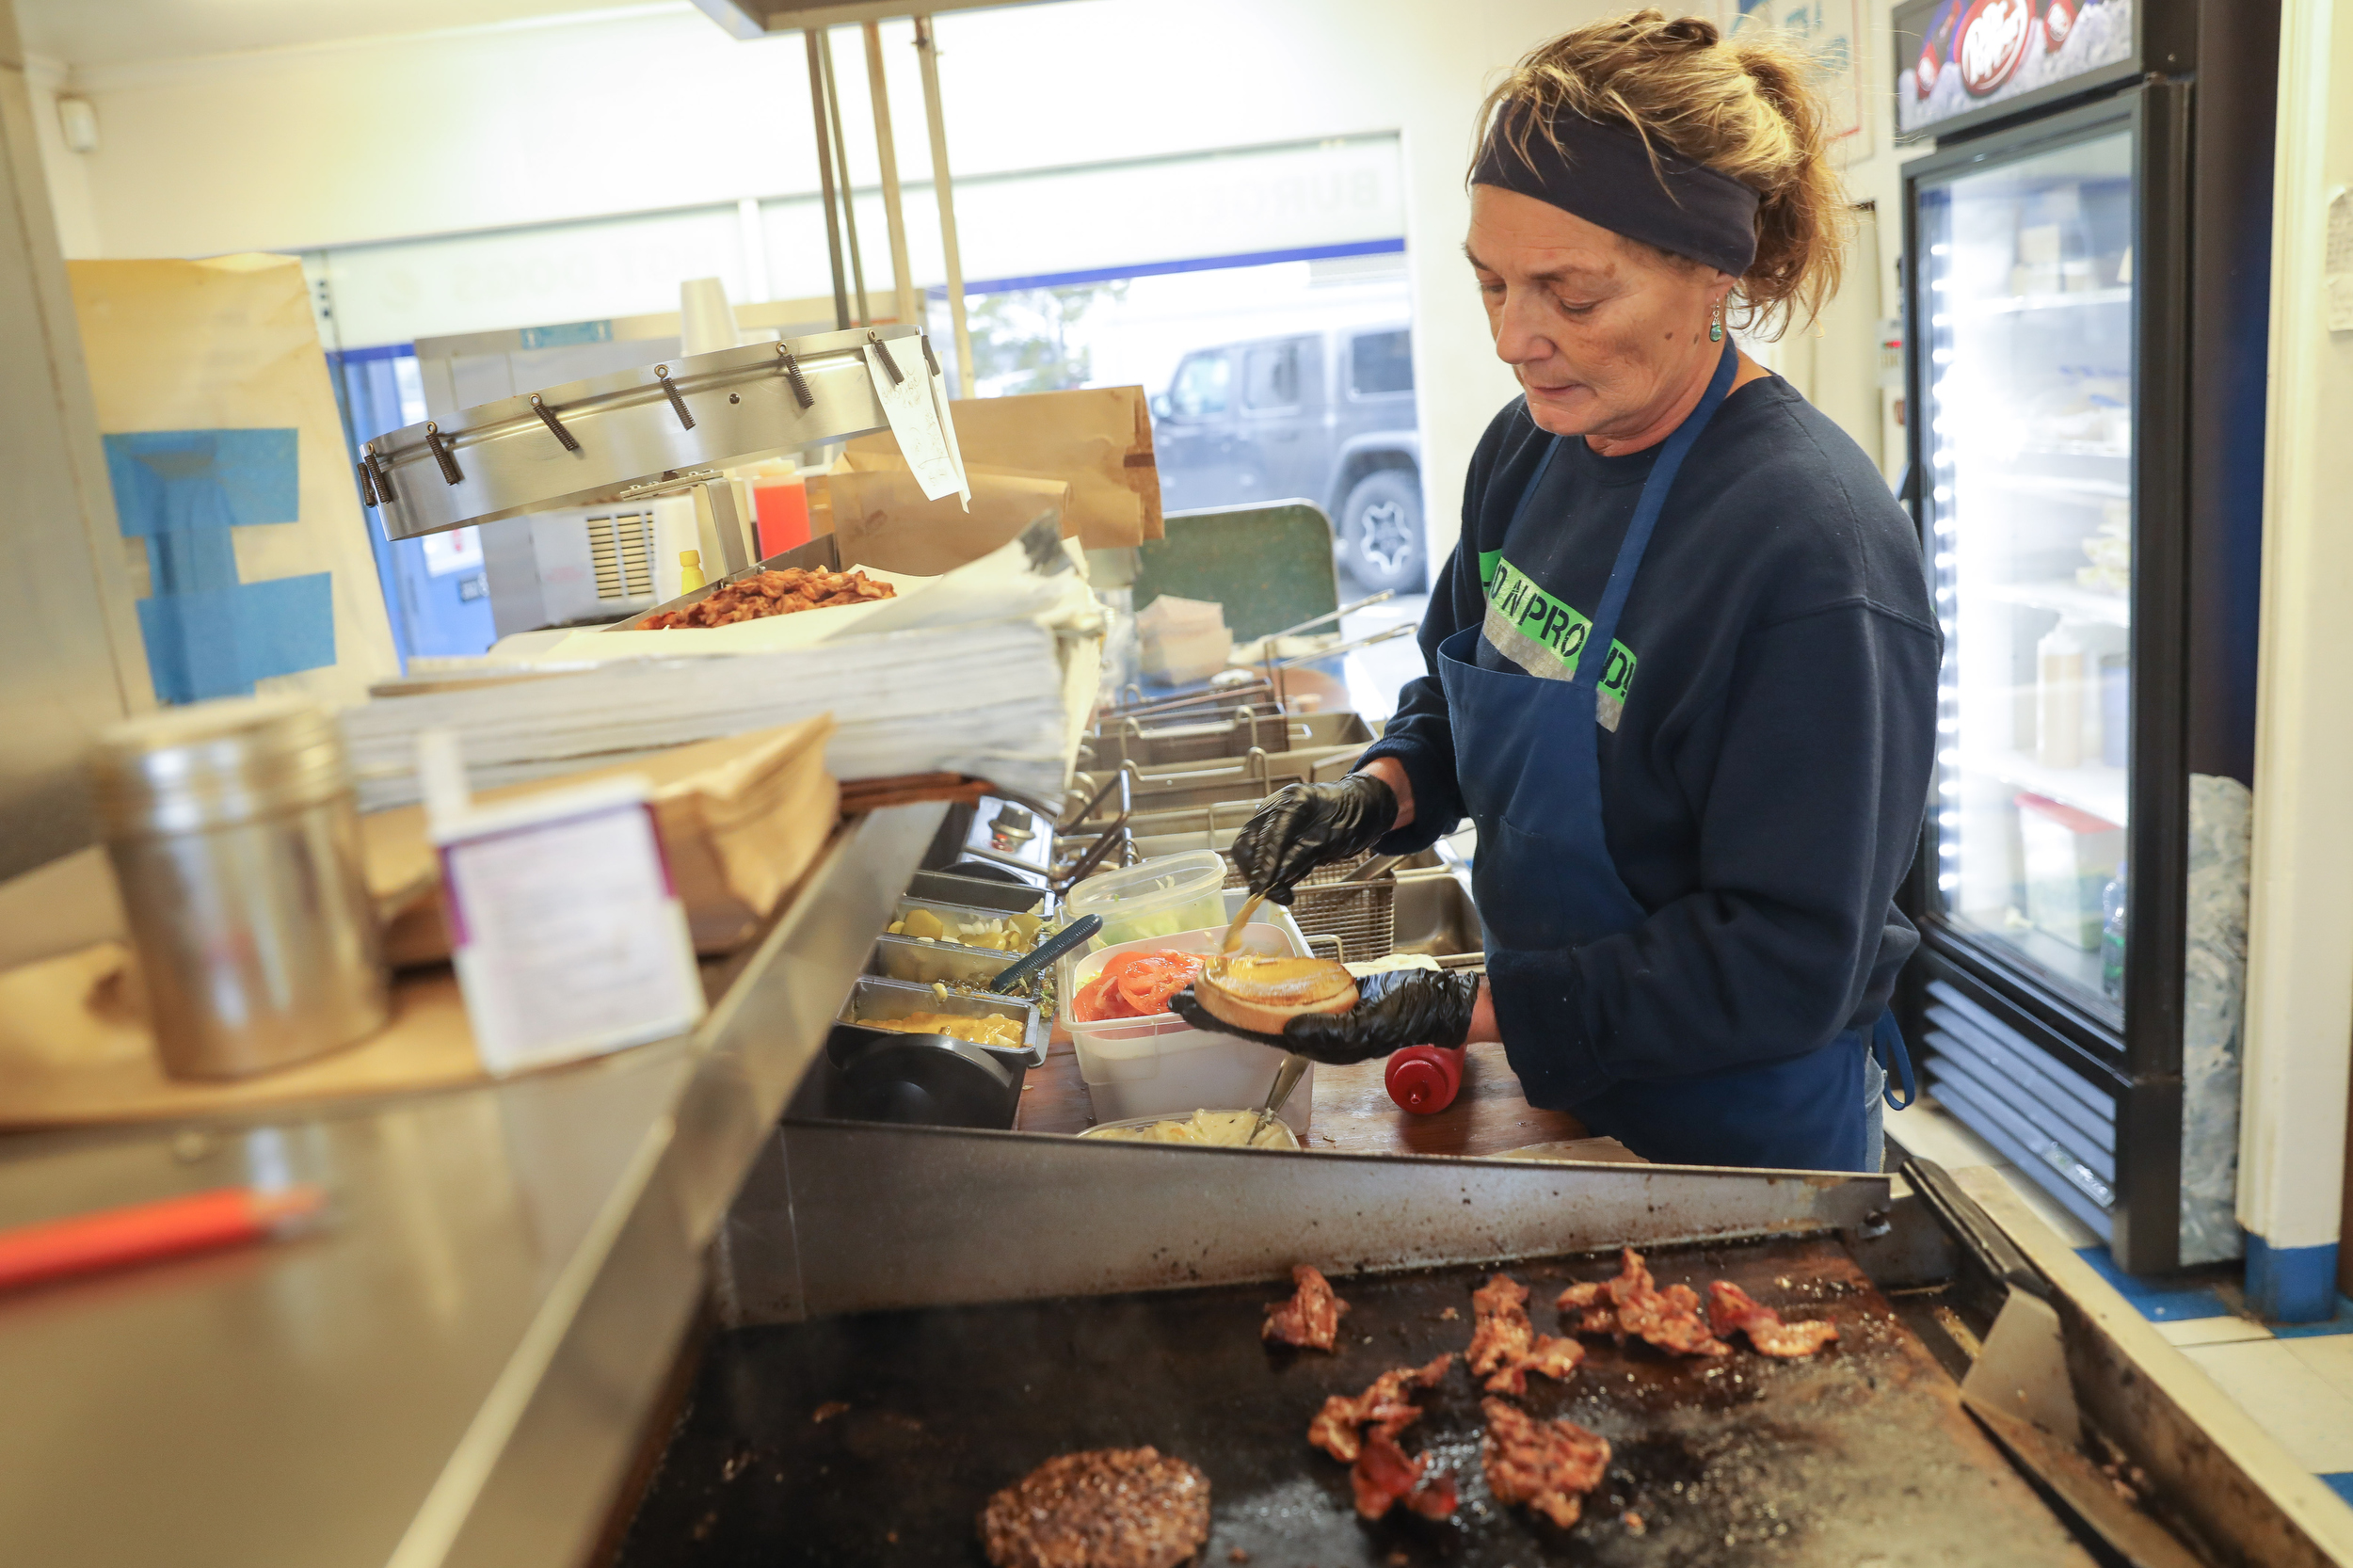 A woman wearing blue cooks burgers at a restaurant kitchen stove